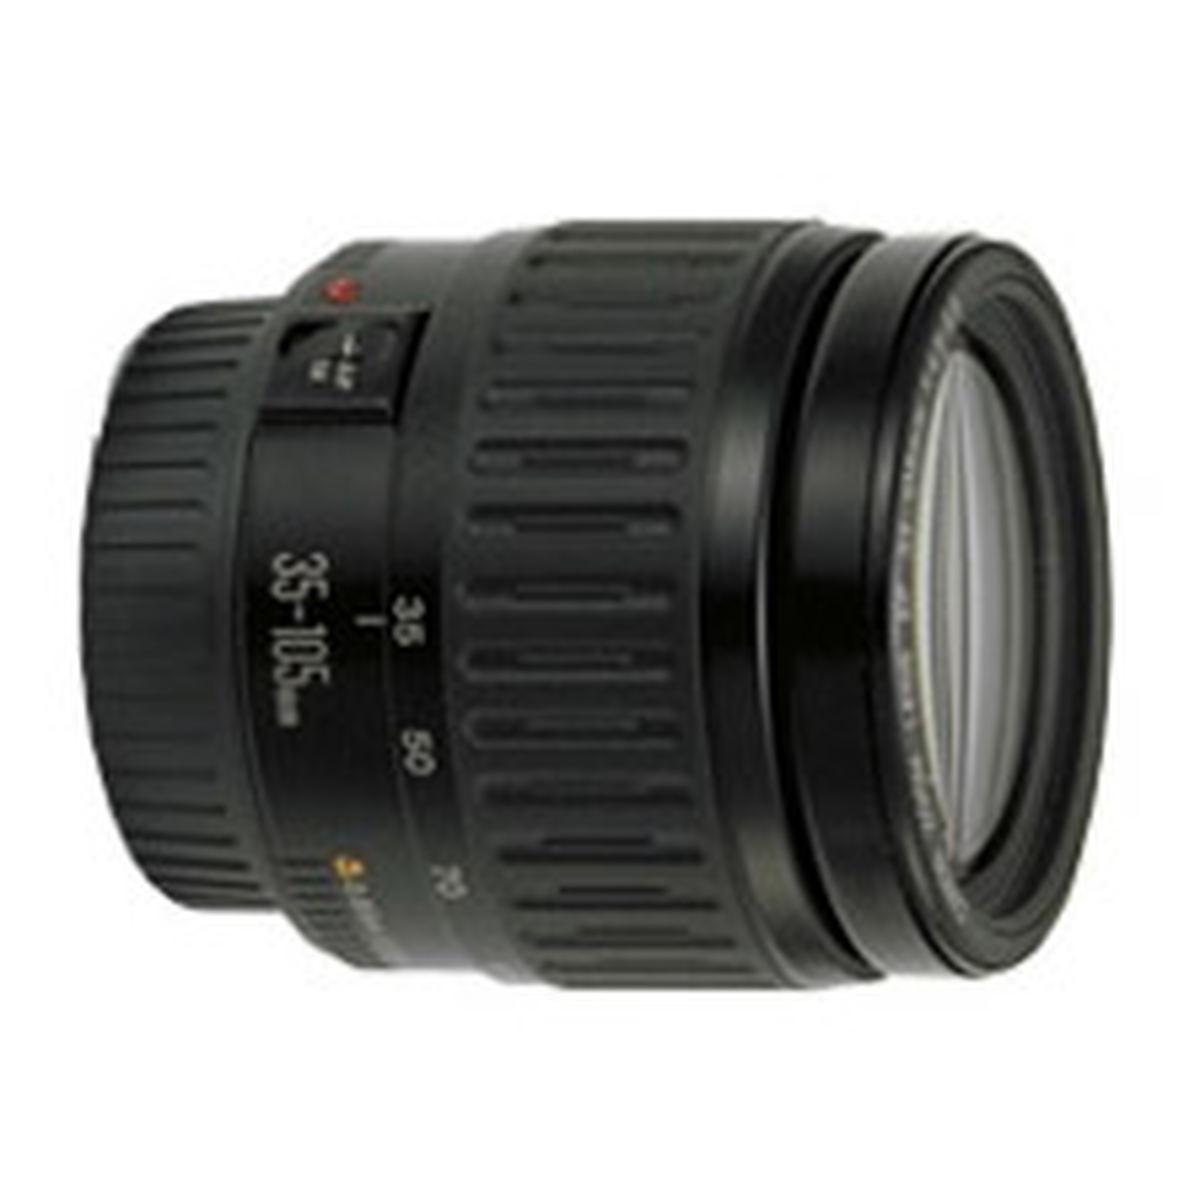 Canon EF 35-105mm f/4.5-5.6 : Specifications and Opinions | JuzaPhoto